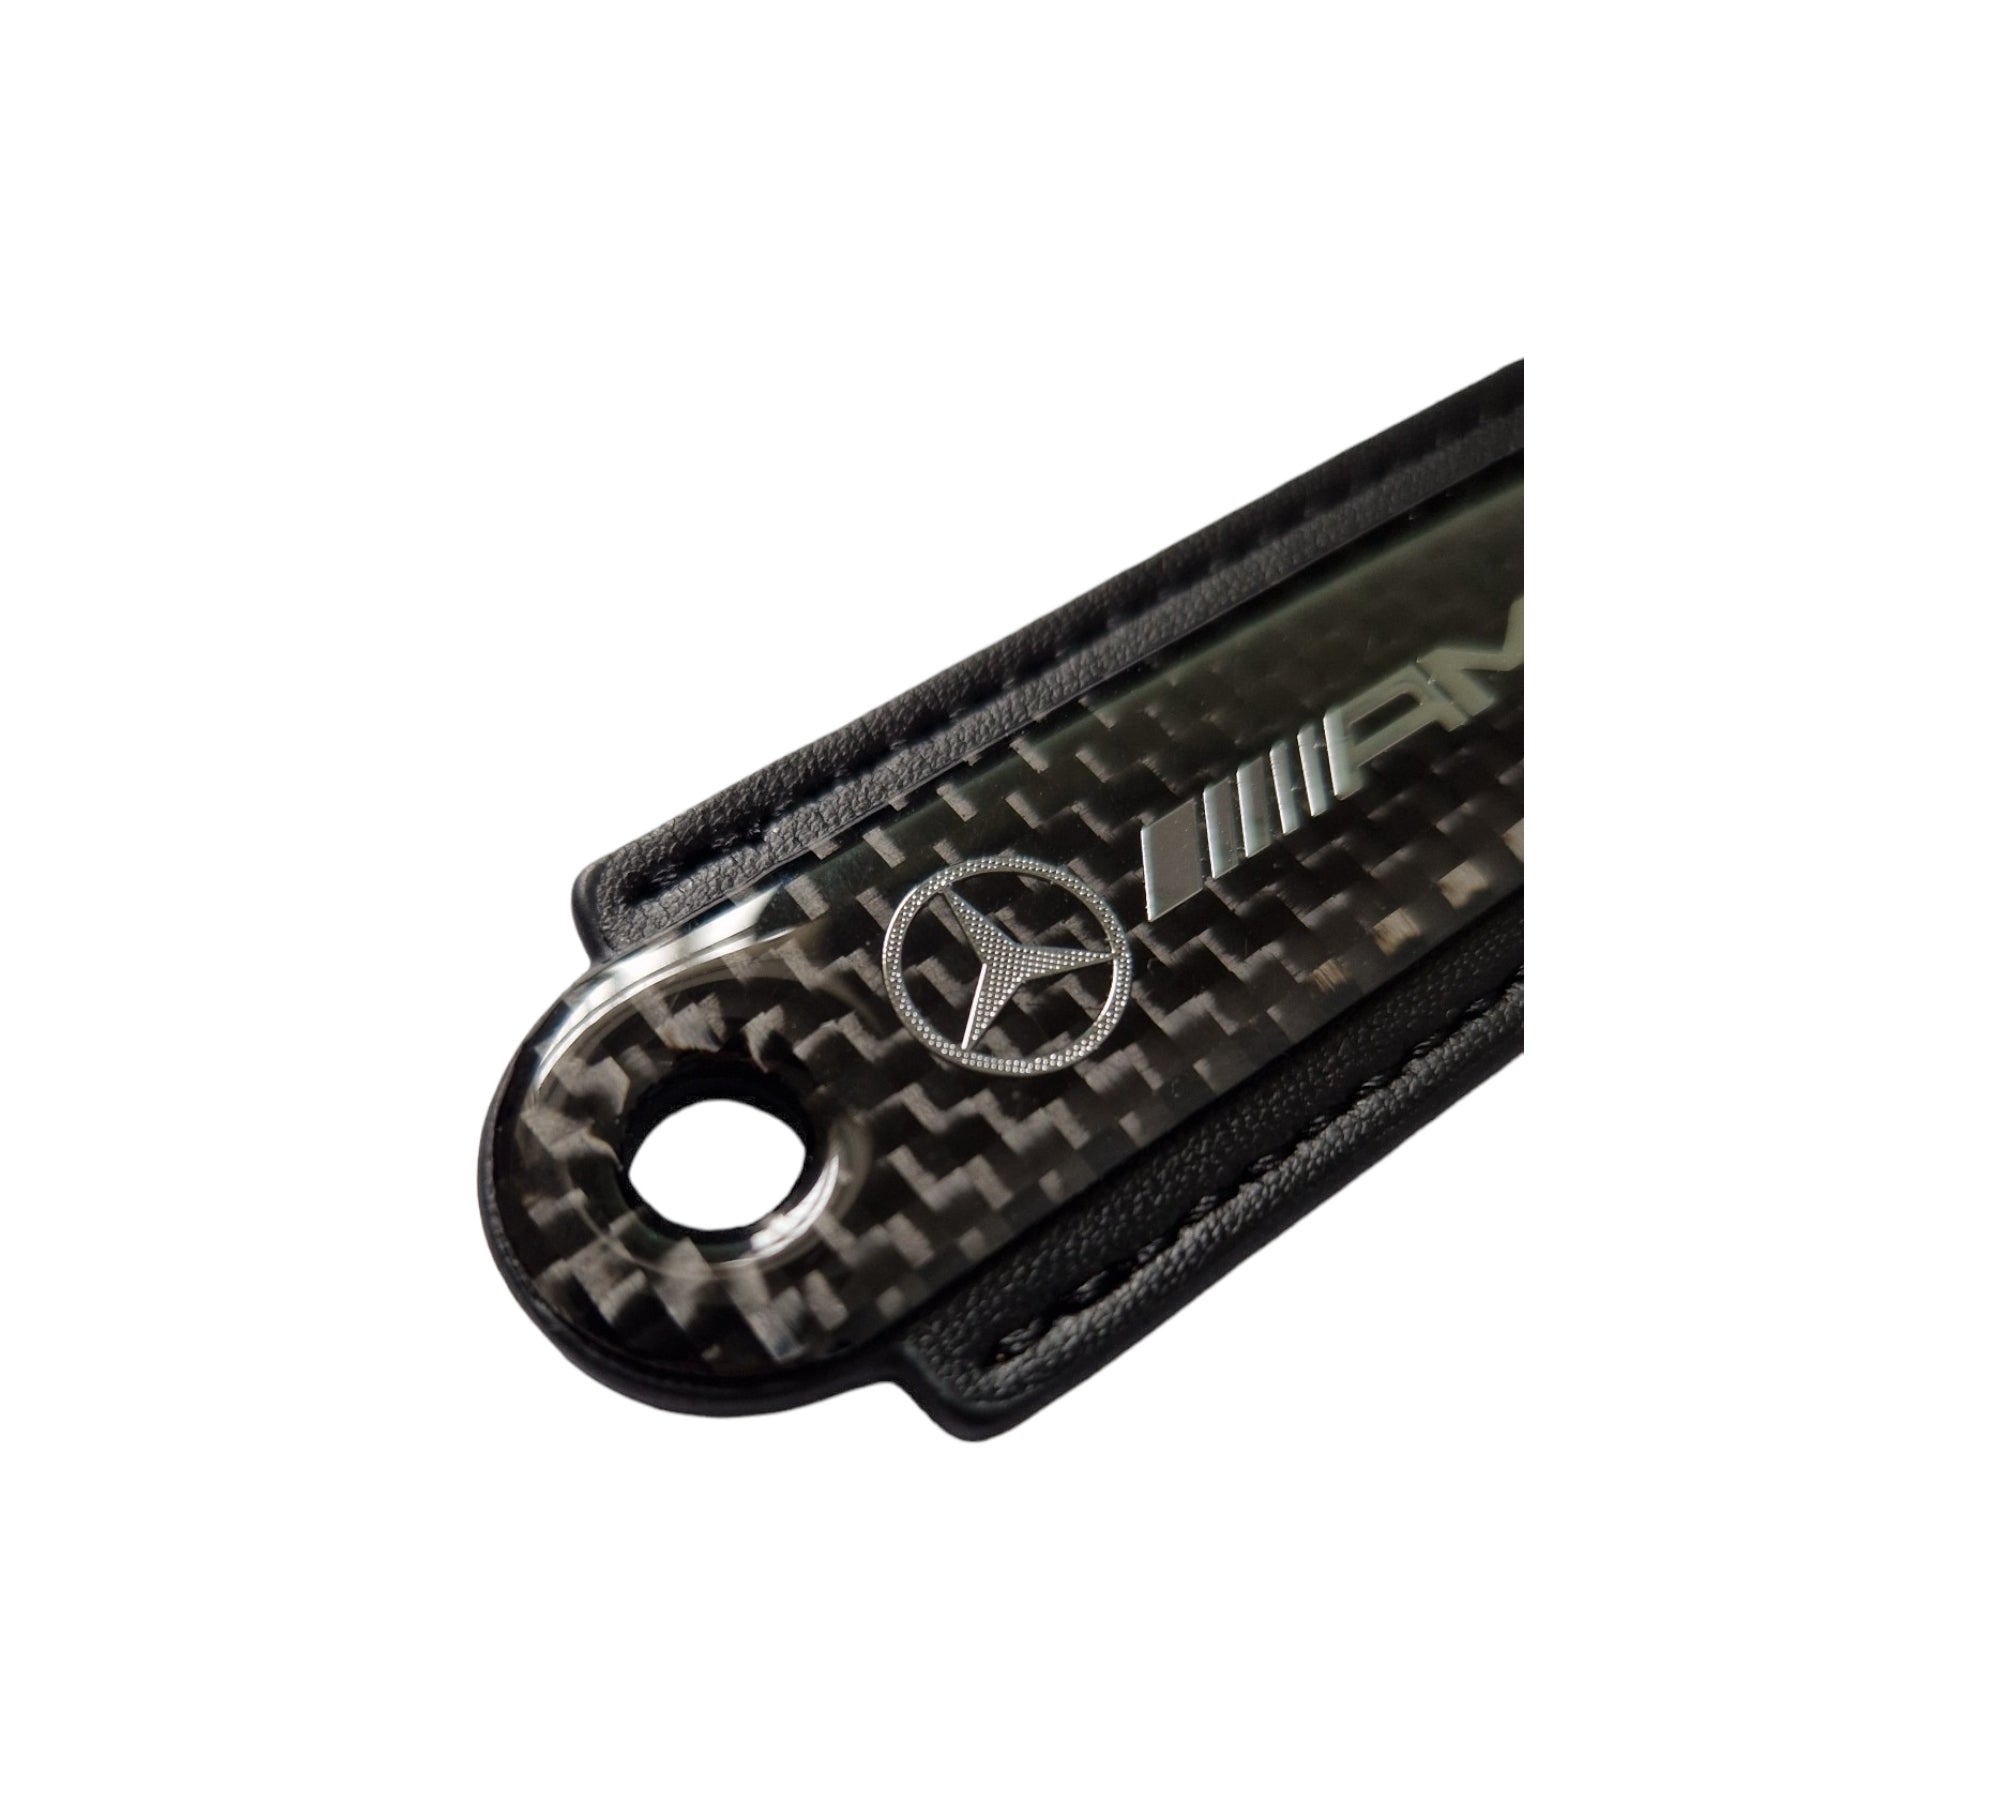 AMG Black Carbon Fibre/Leather Key Ring - Accessories